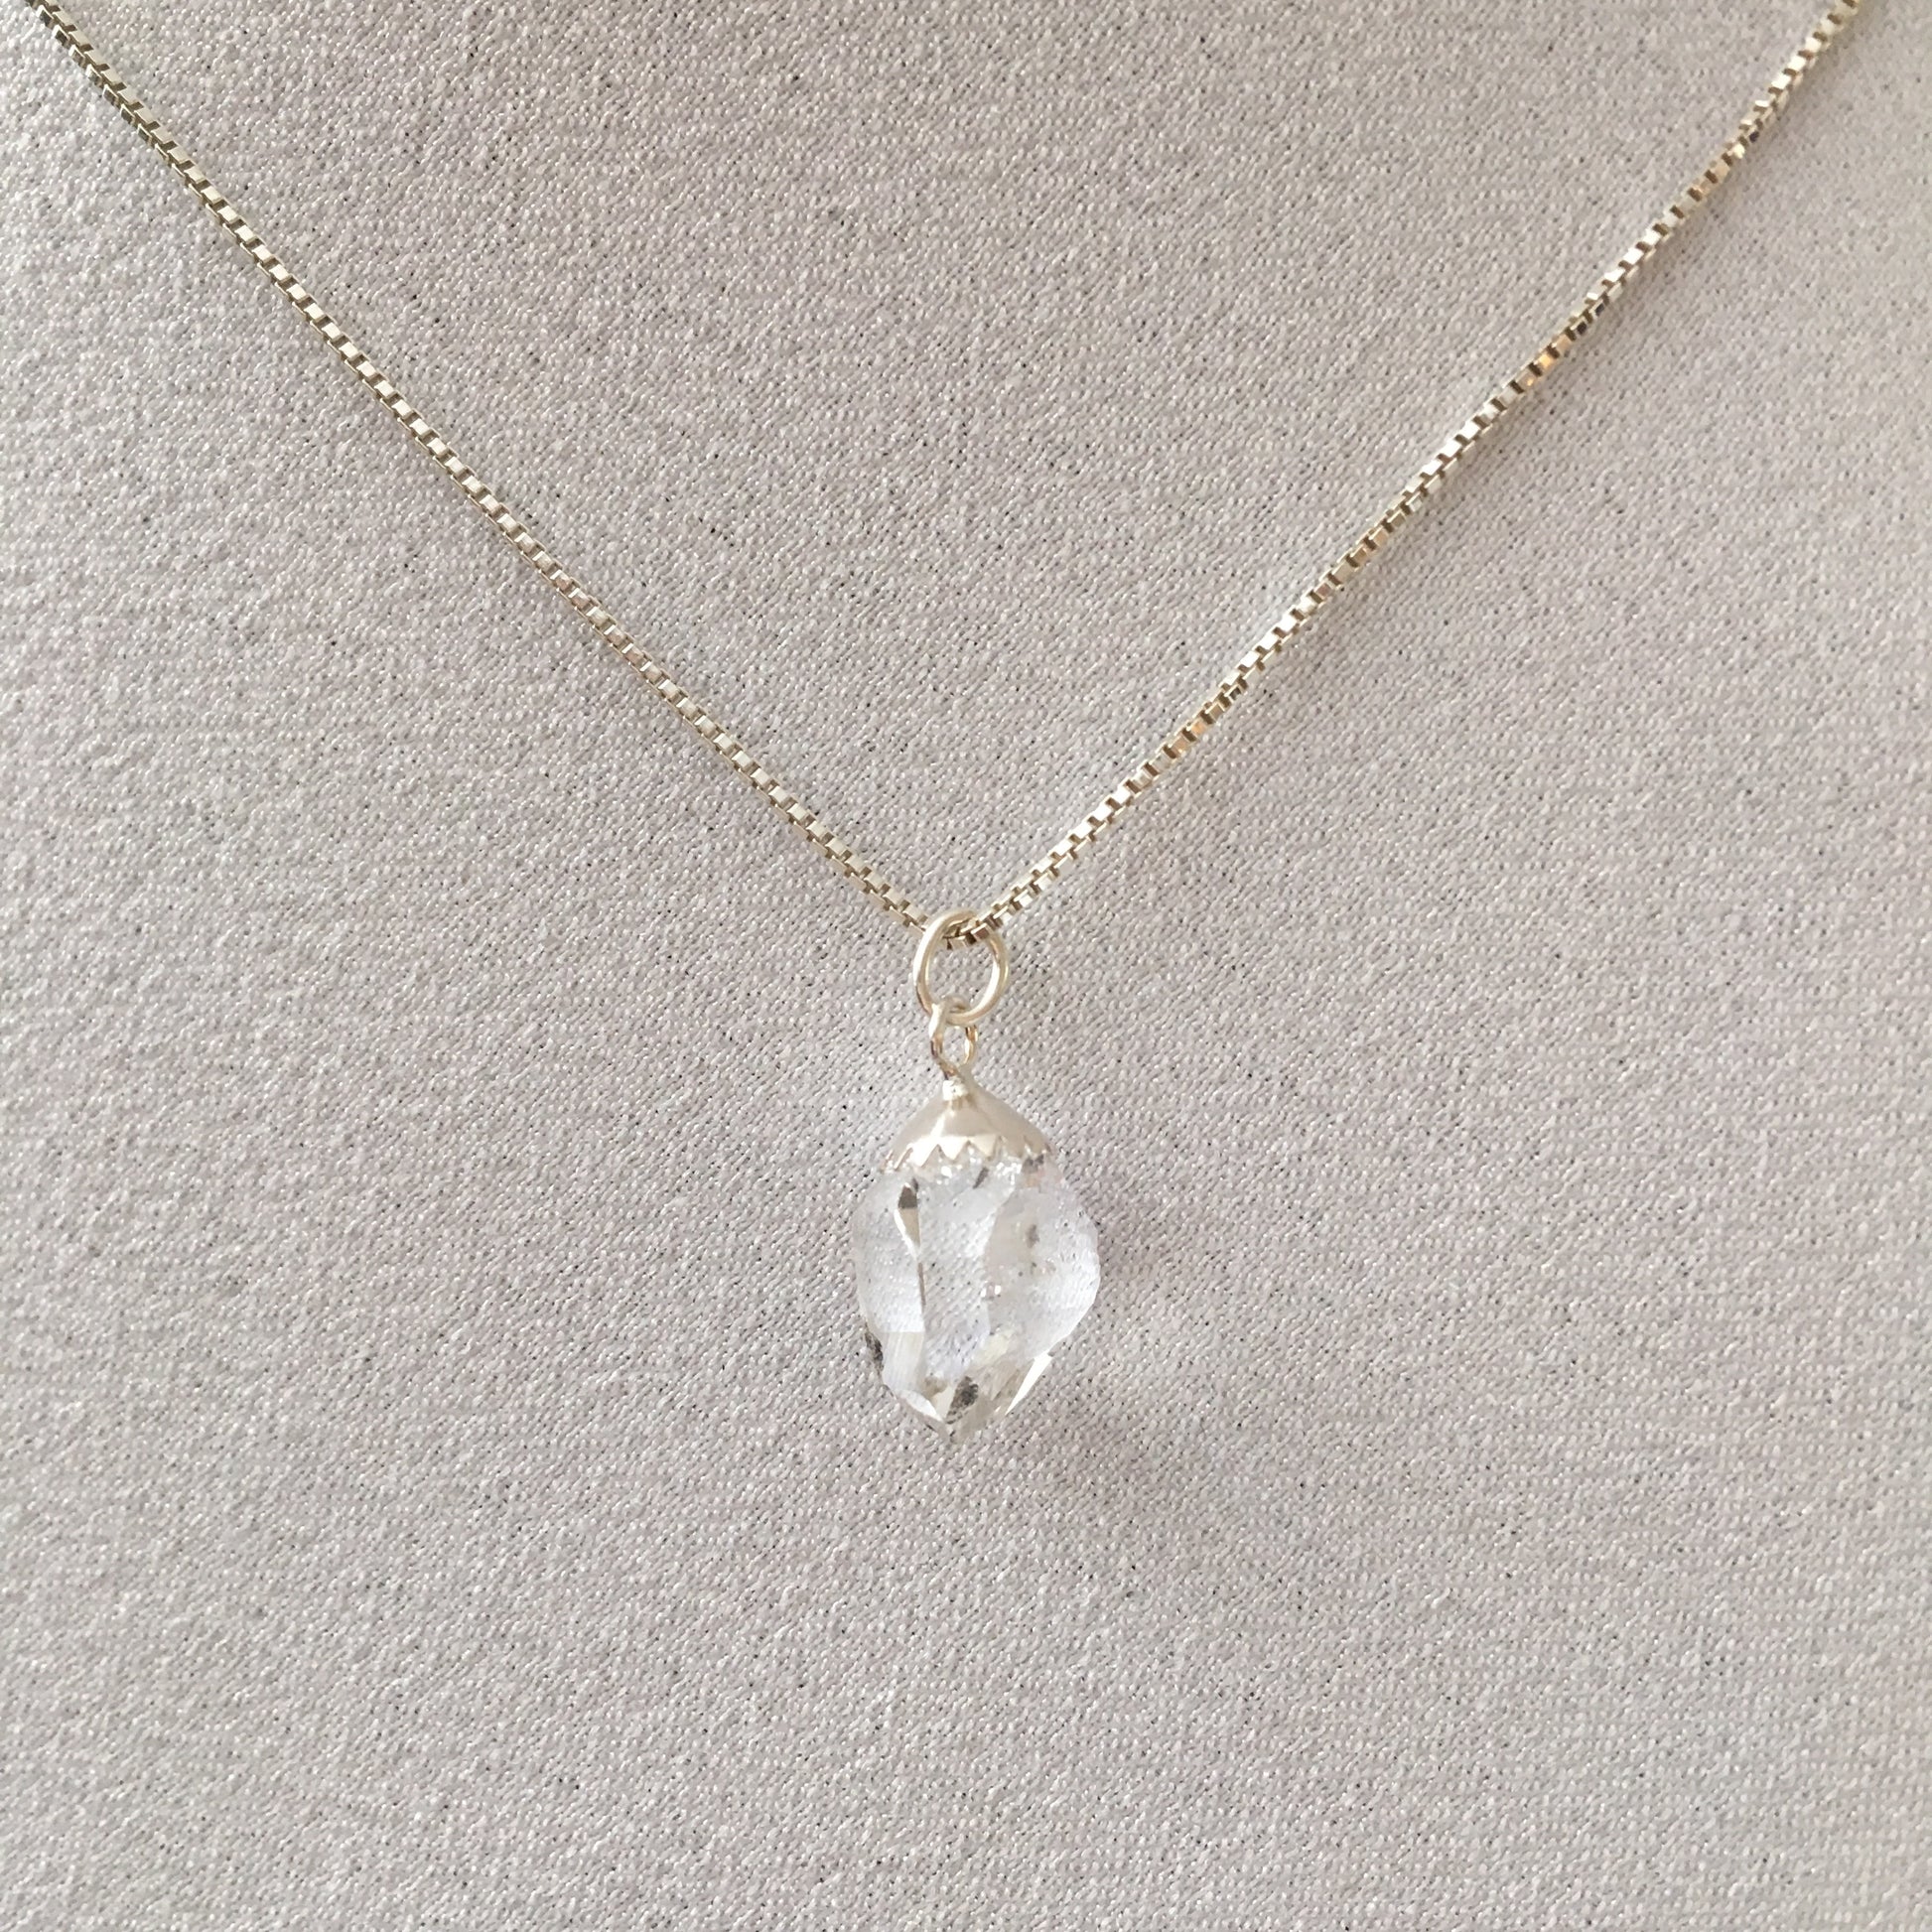 Herkimer Diamond 4.70 carat Sterling Silver Box Chain Necklace 